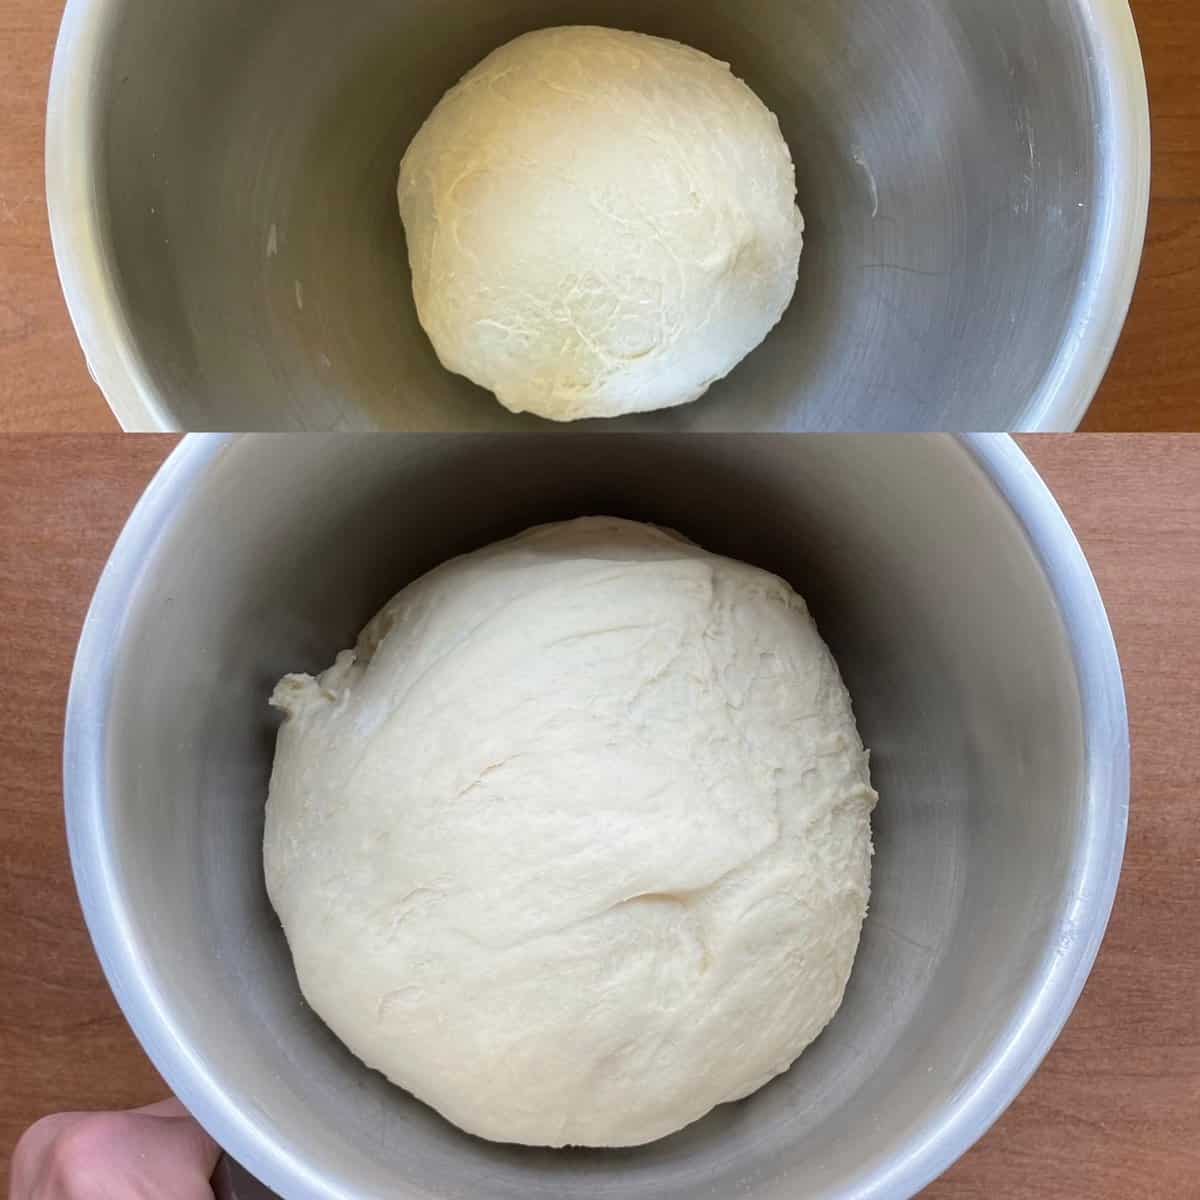 two panels showing the first rise of the semolina bread in the mixing bowl.